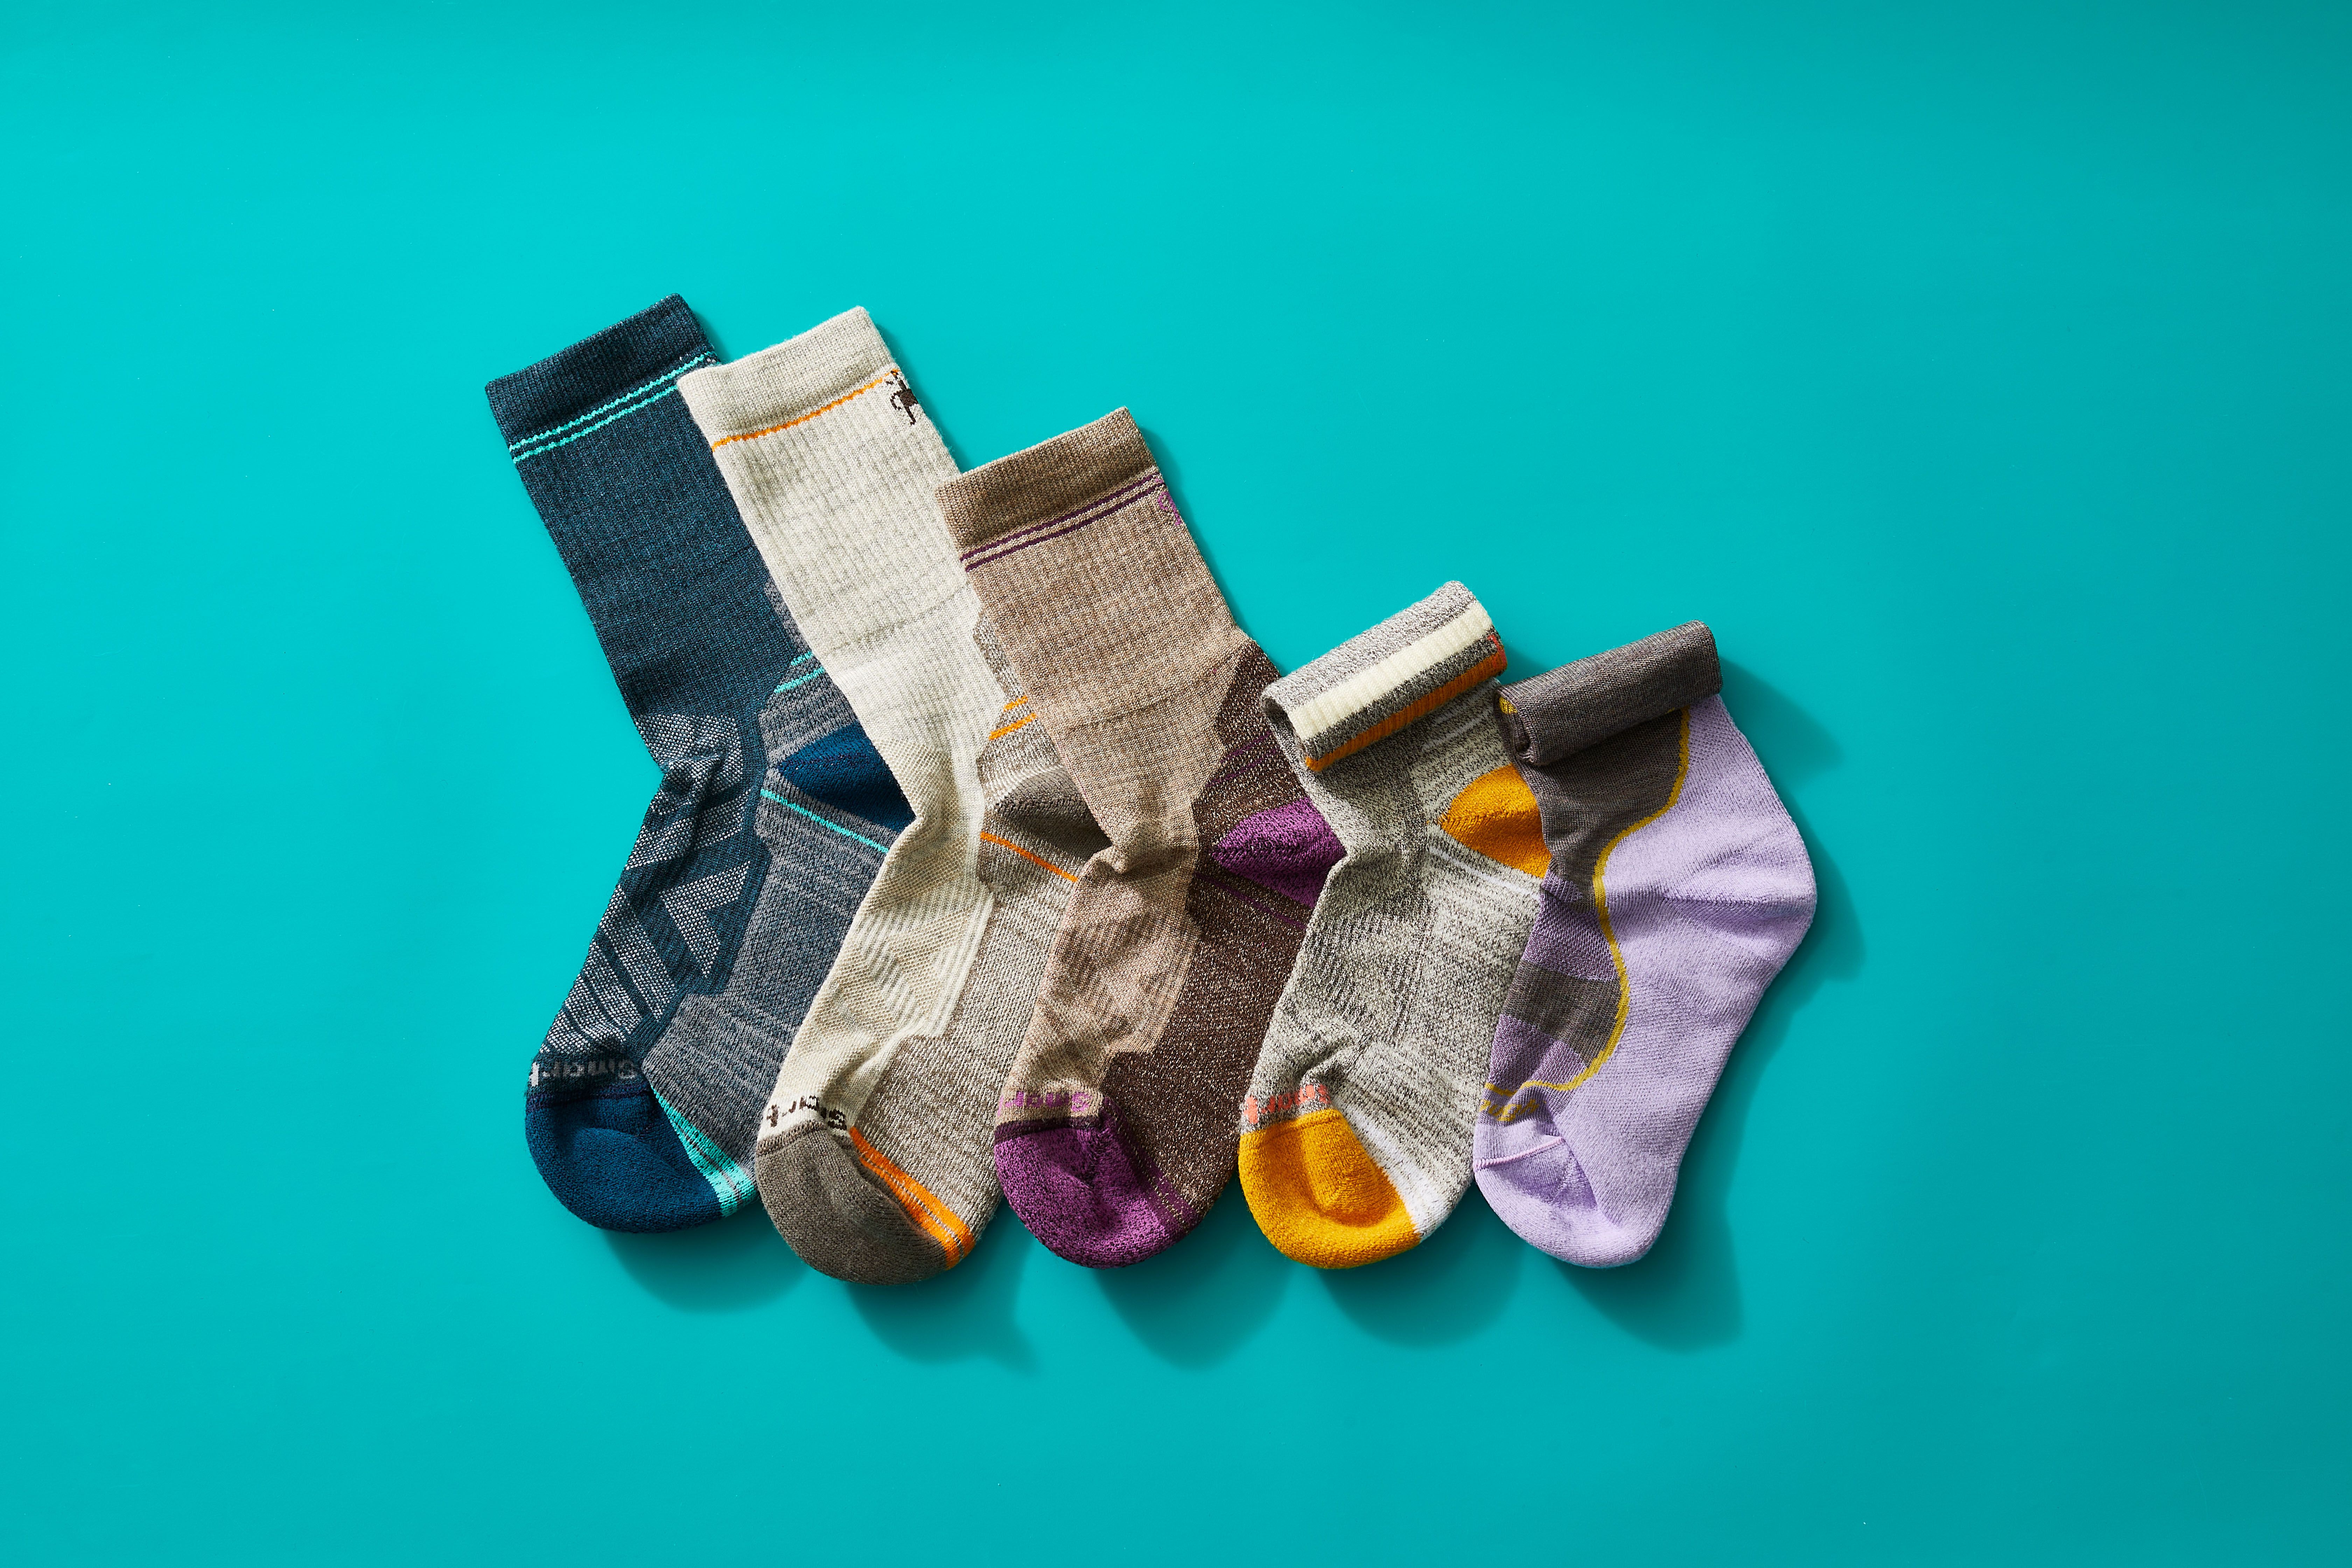 Know More About Free Soloing And The Best Merino Blend Socks